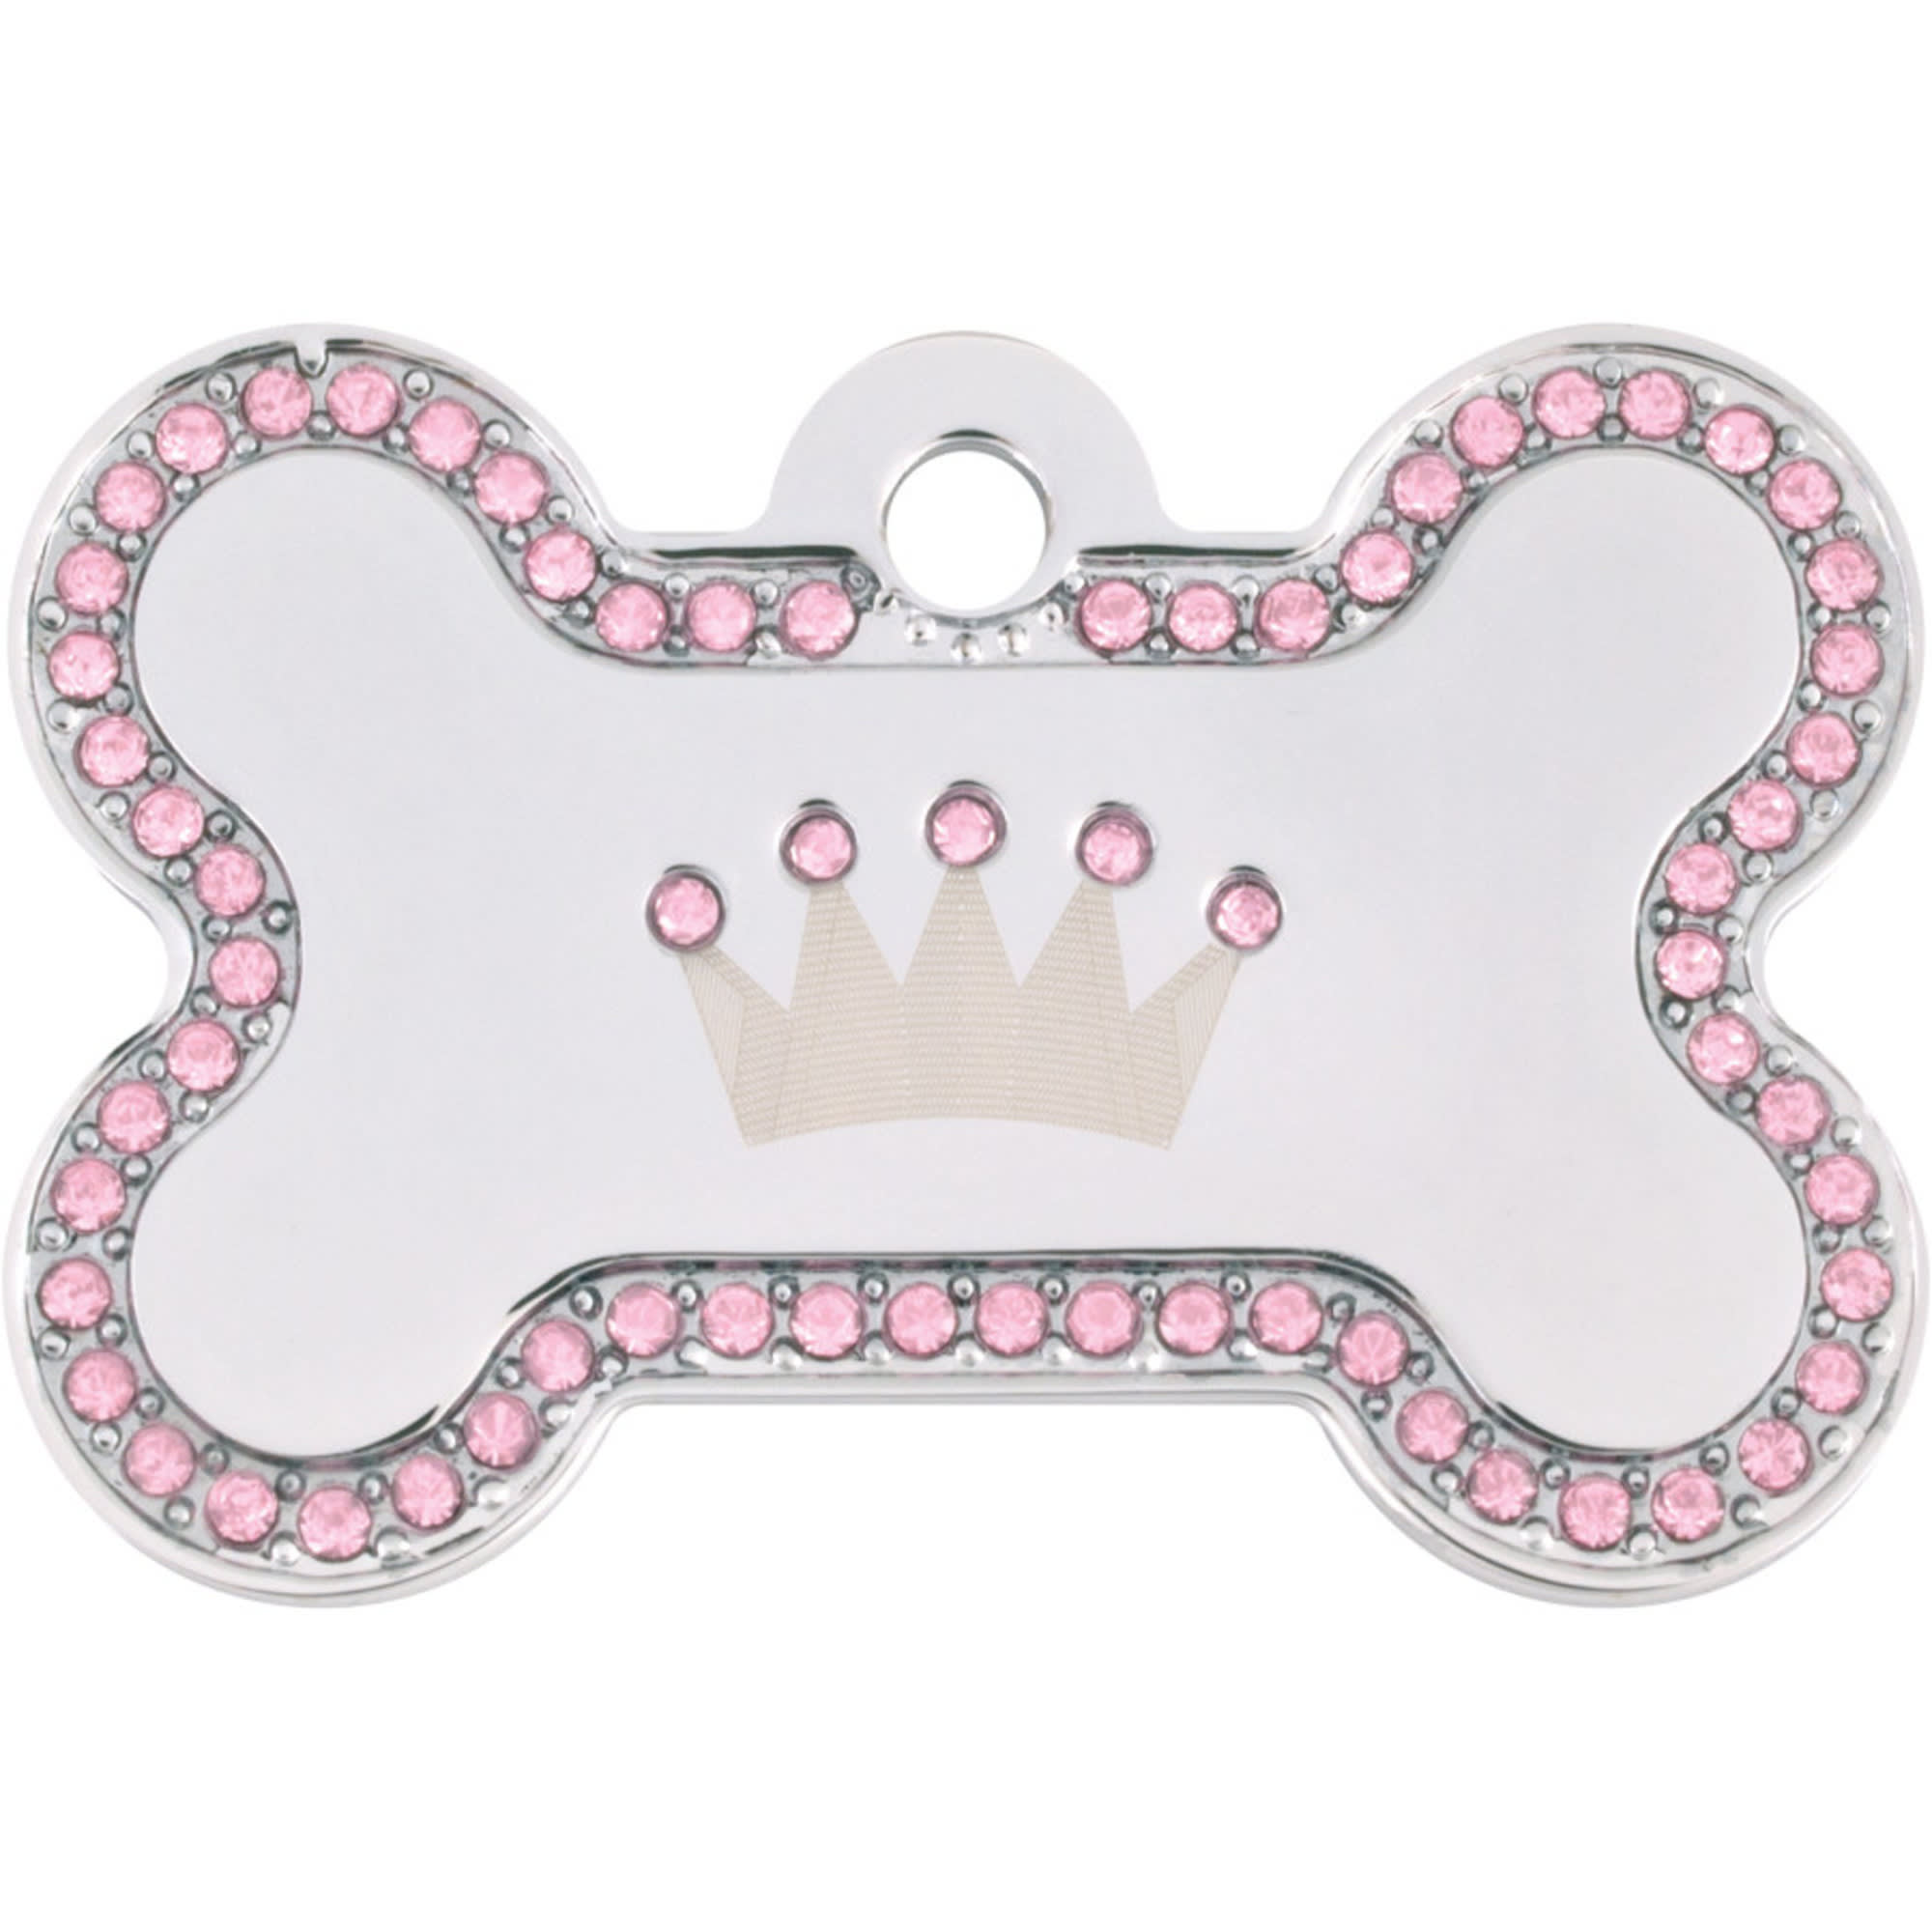 Small Heart Shape Pet ID Tag with Crown by Quick-Tag